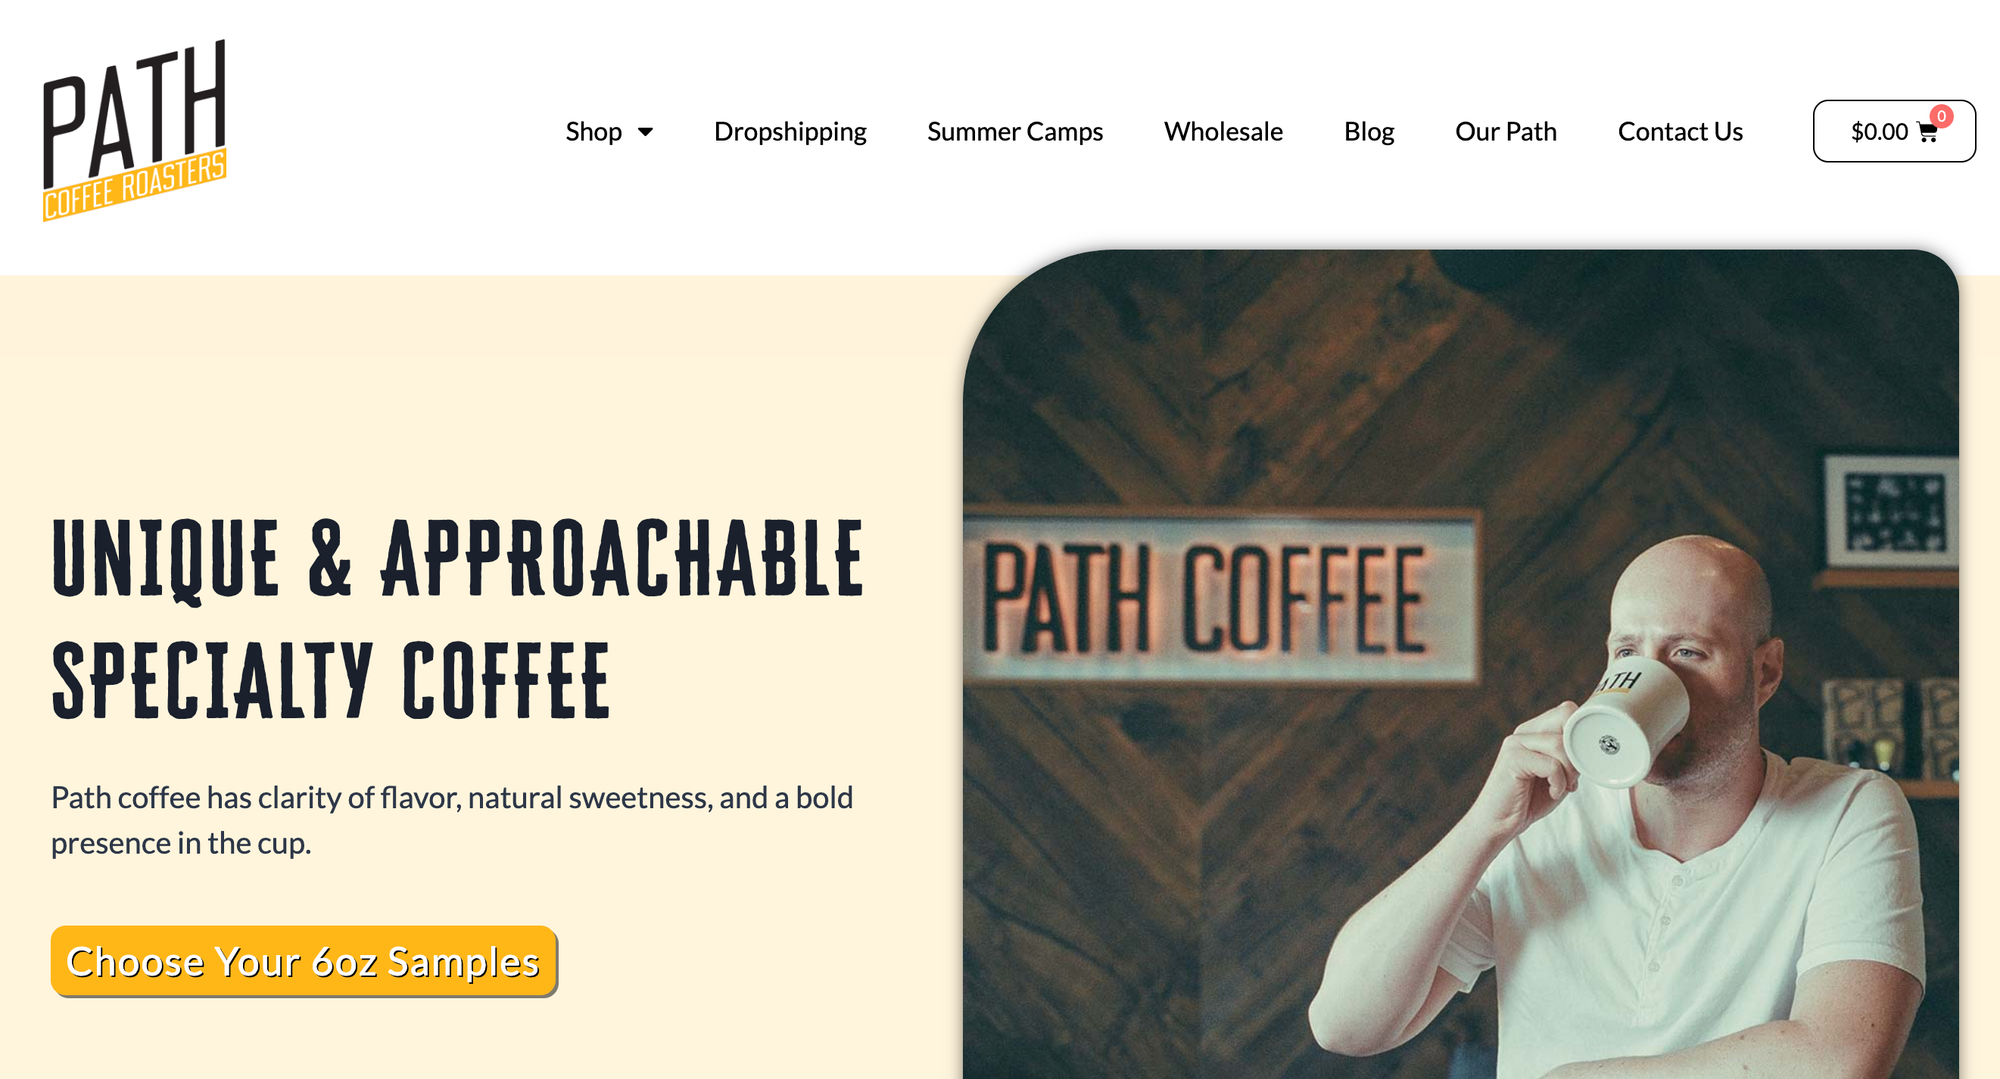 A person holding a cup path coffee